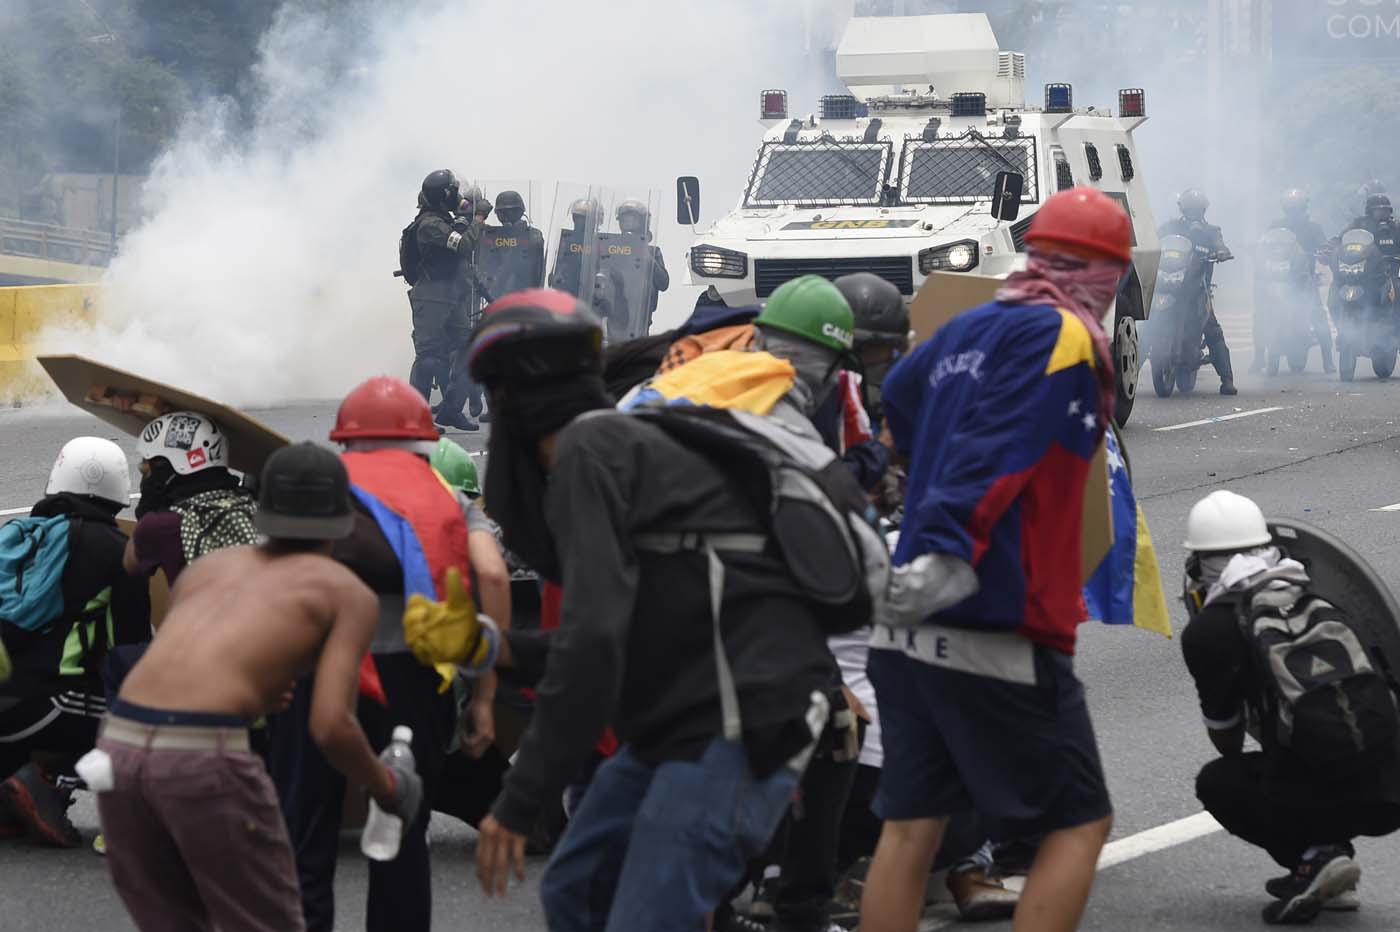 Demonstrators clash with riot police during a protest against Venezuelan President Nicolas Maduro, in Caracas on May 3, 2017. Venezuela's angry opposition rallied Wednesday vowing huge street protests against President Nicolas Maduro's plan to rewrite the constitution and accusing him of dodging elections to cling to power despite deadly unrest. / AFP PHOTO / JUAN BARRETO